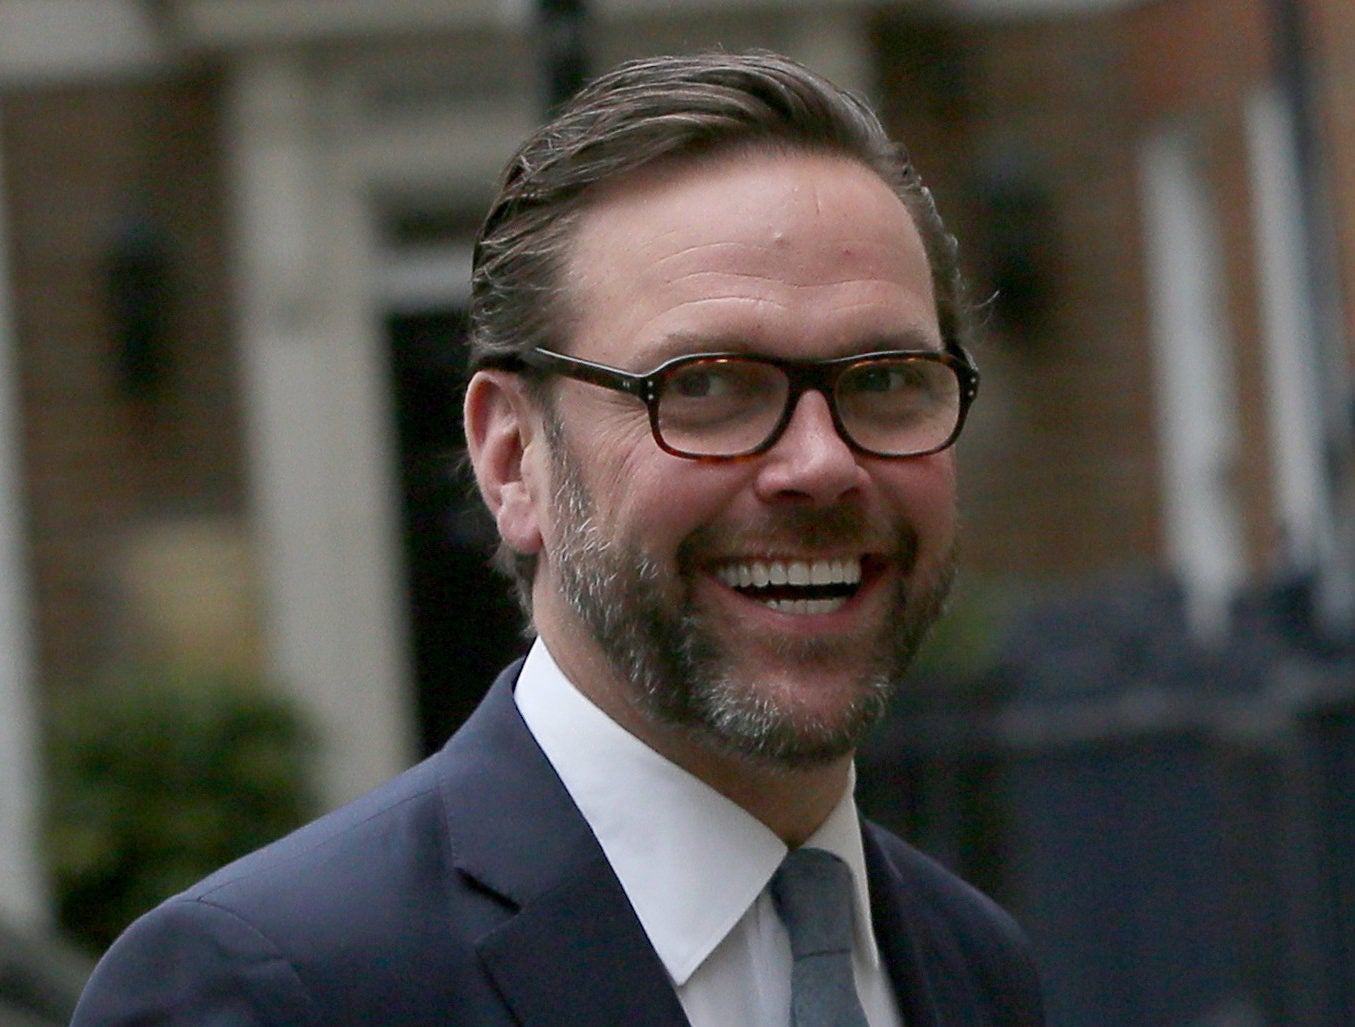 James Murdoch buys minority stake in Vice Media, reports say